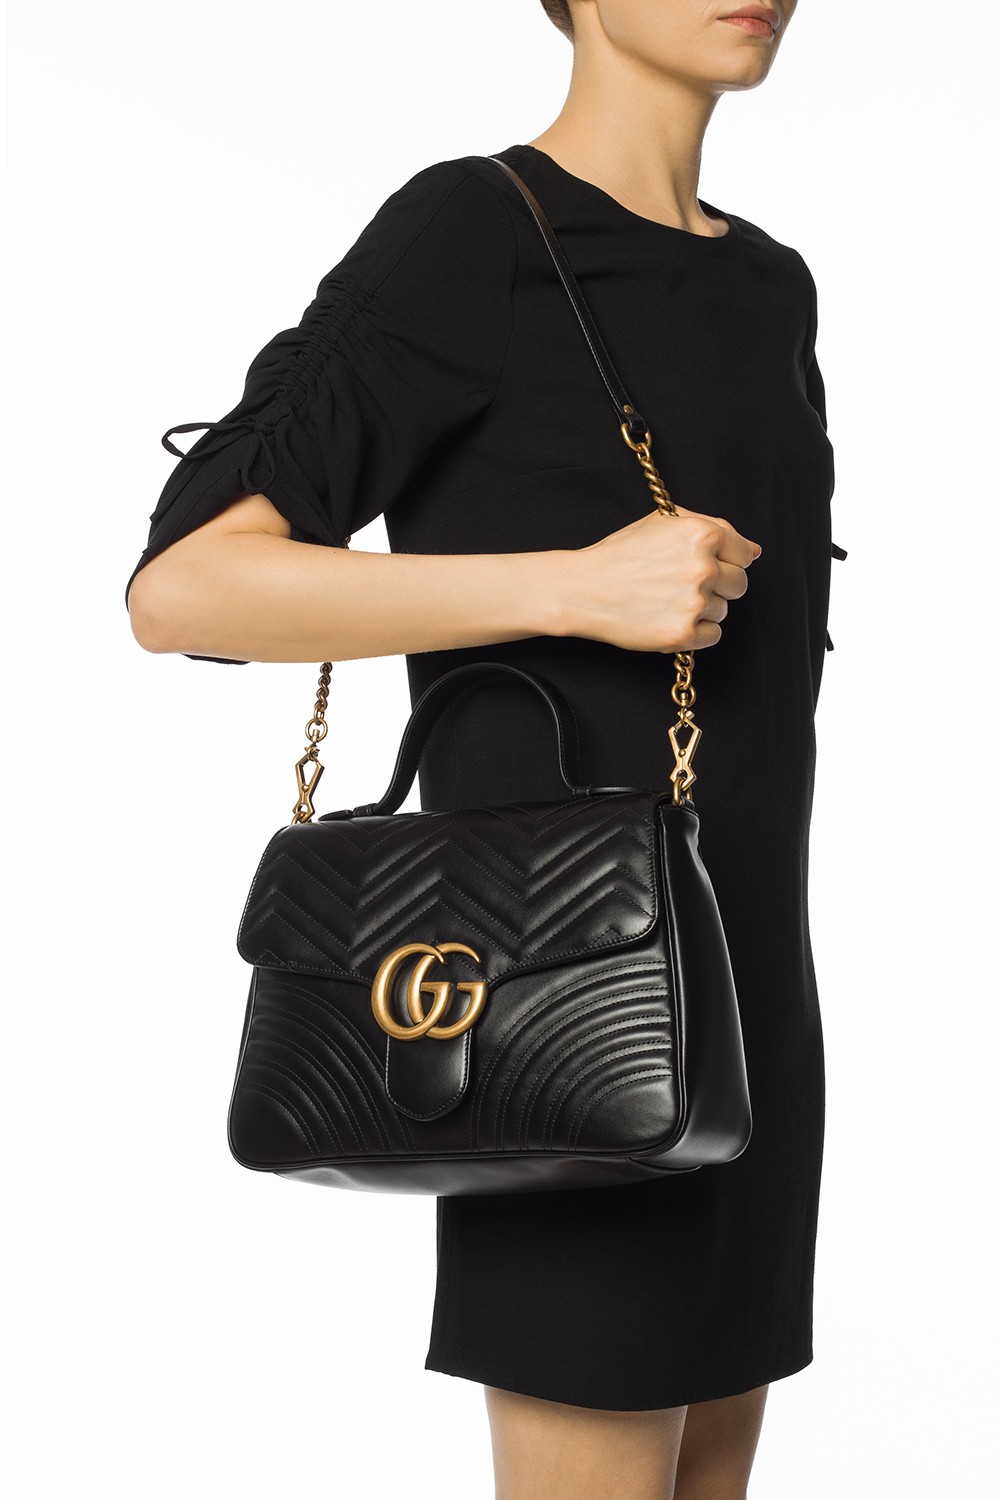 Gucci Luxury Designer 5A Quality Shoulder Bags Tote Genuine Good Leather  Marmont Womens Men Crossbody Bag Handbags Wallet Handbag Totes GG Purses  Caviar From Ziot_stor99, $1.04